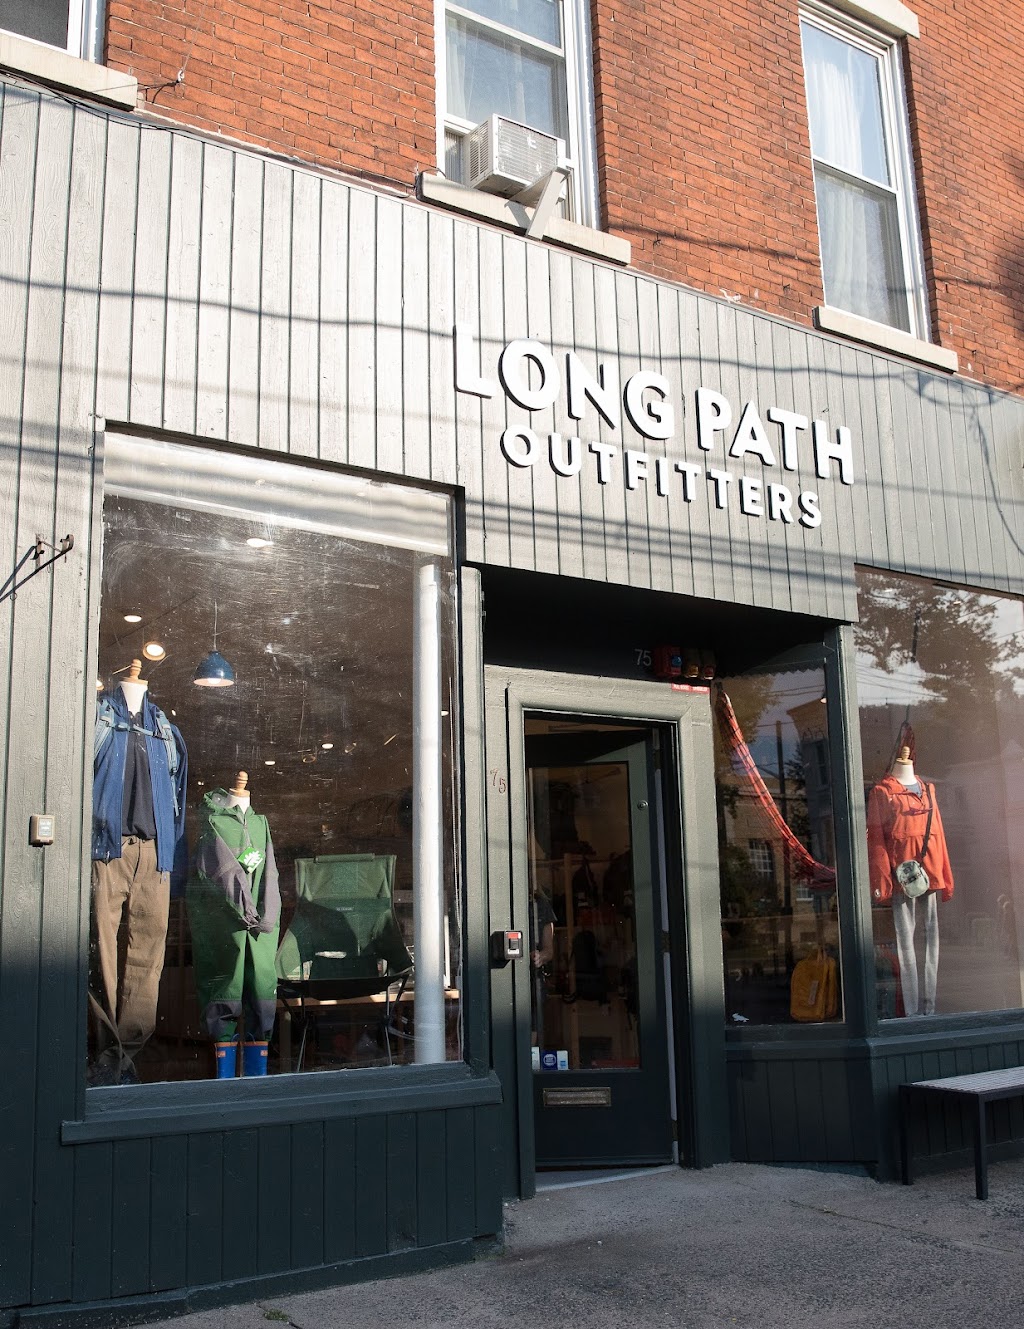 Long Path Outfitters | 75 S Broadway, Nyack, NY 10960, USA | Phone: (845) 348-3259